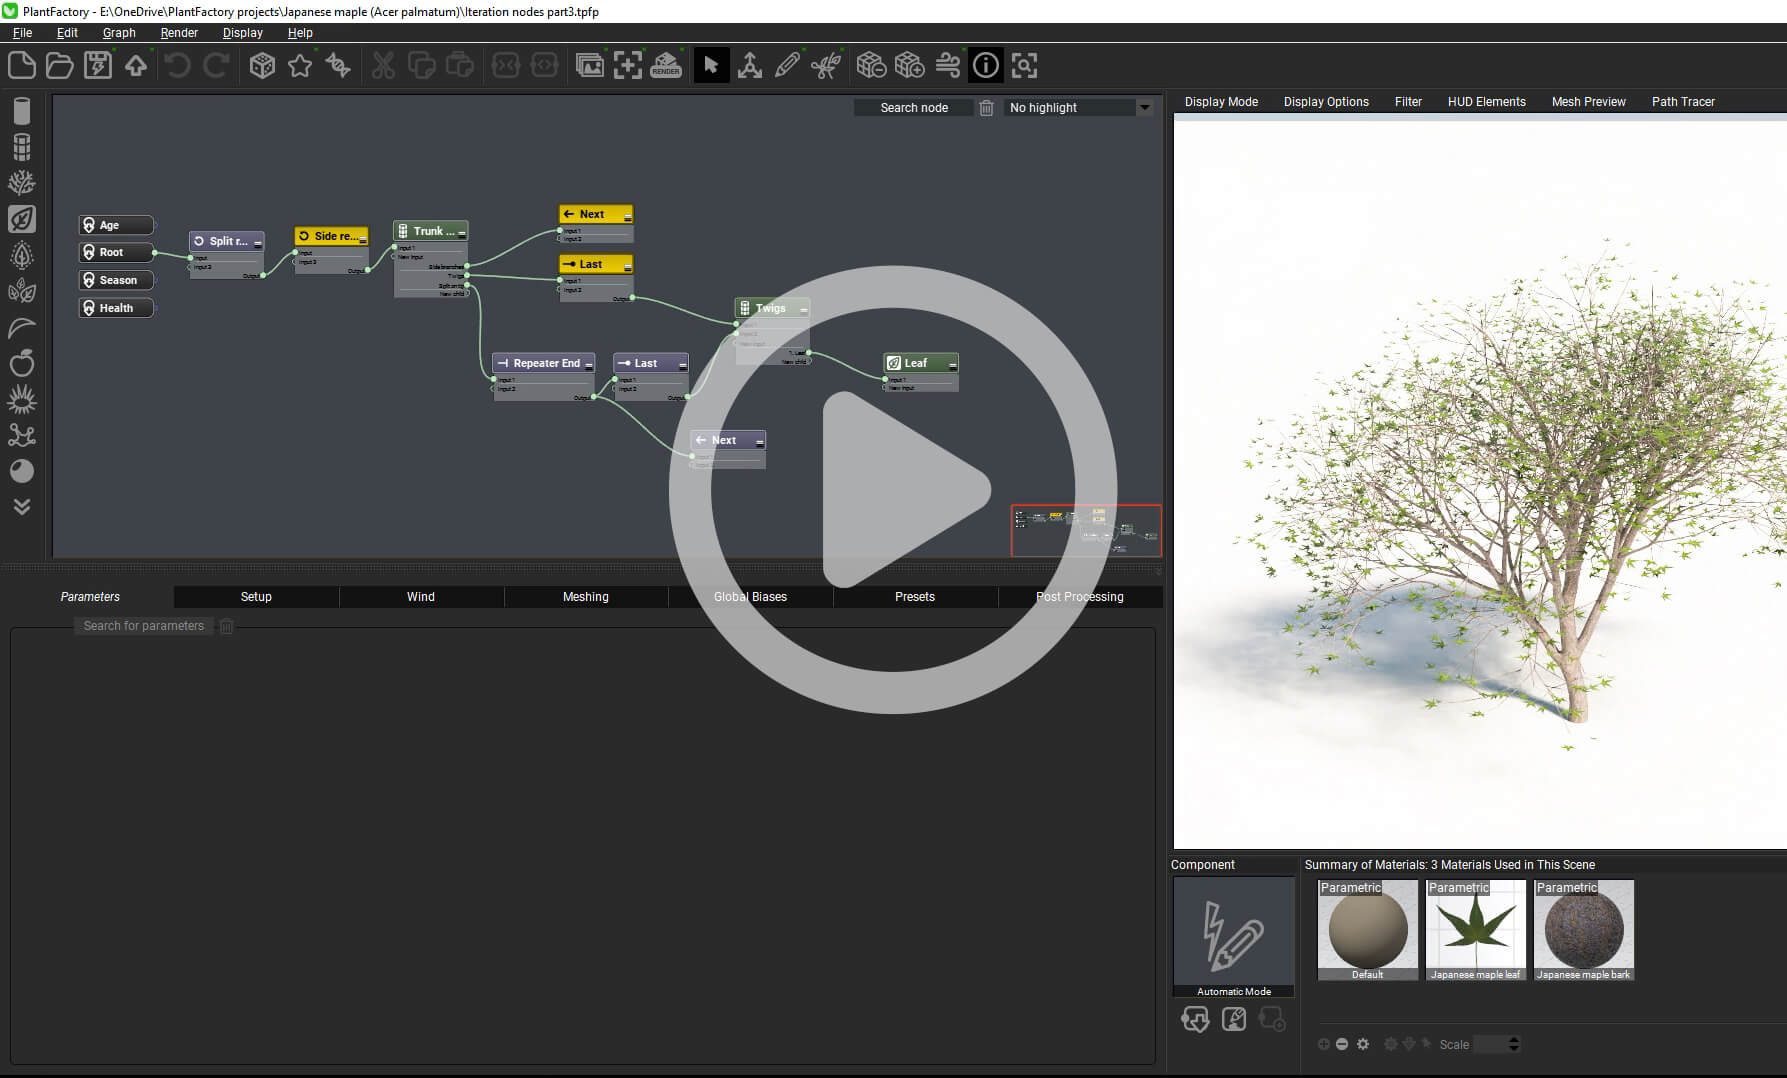 Watch the course on iteration nodes in the learning center